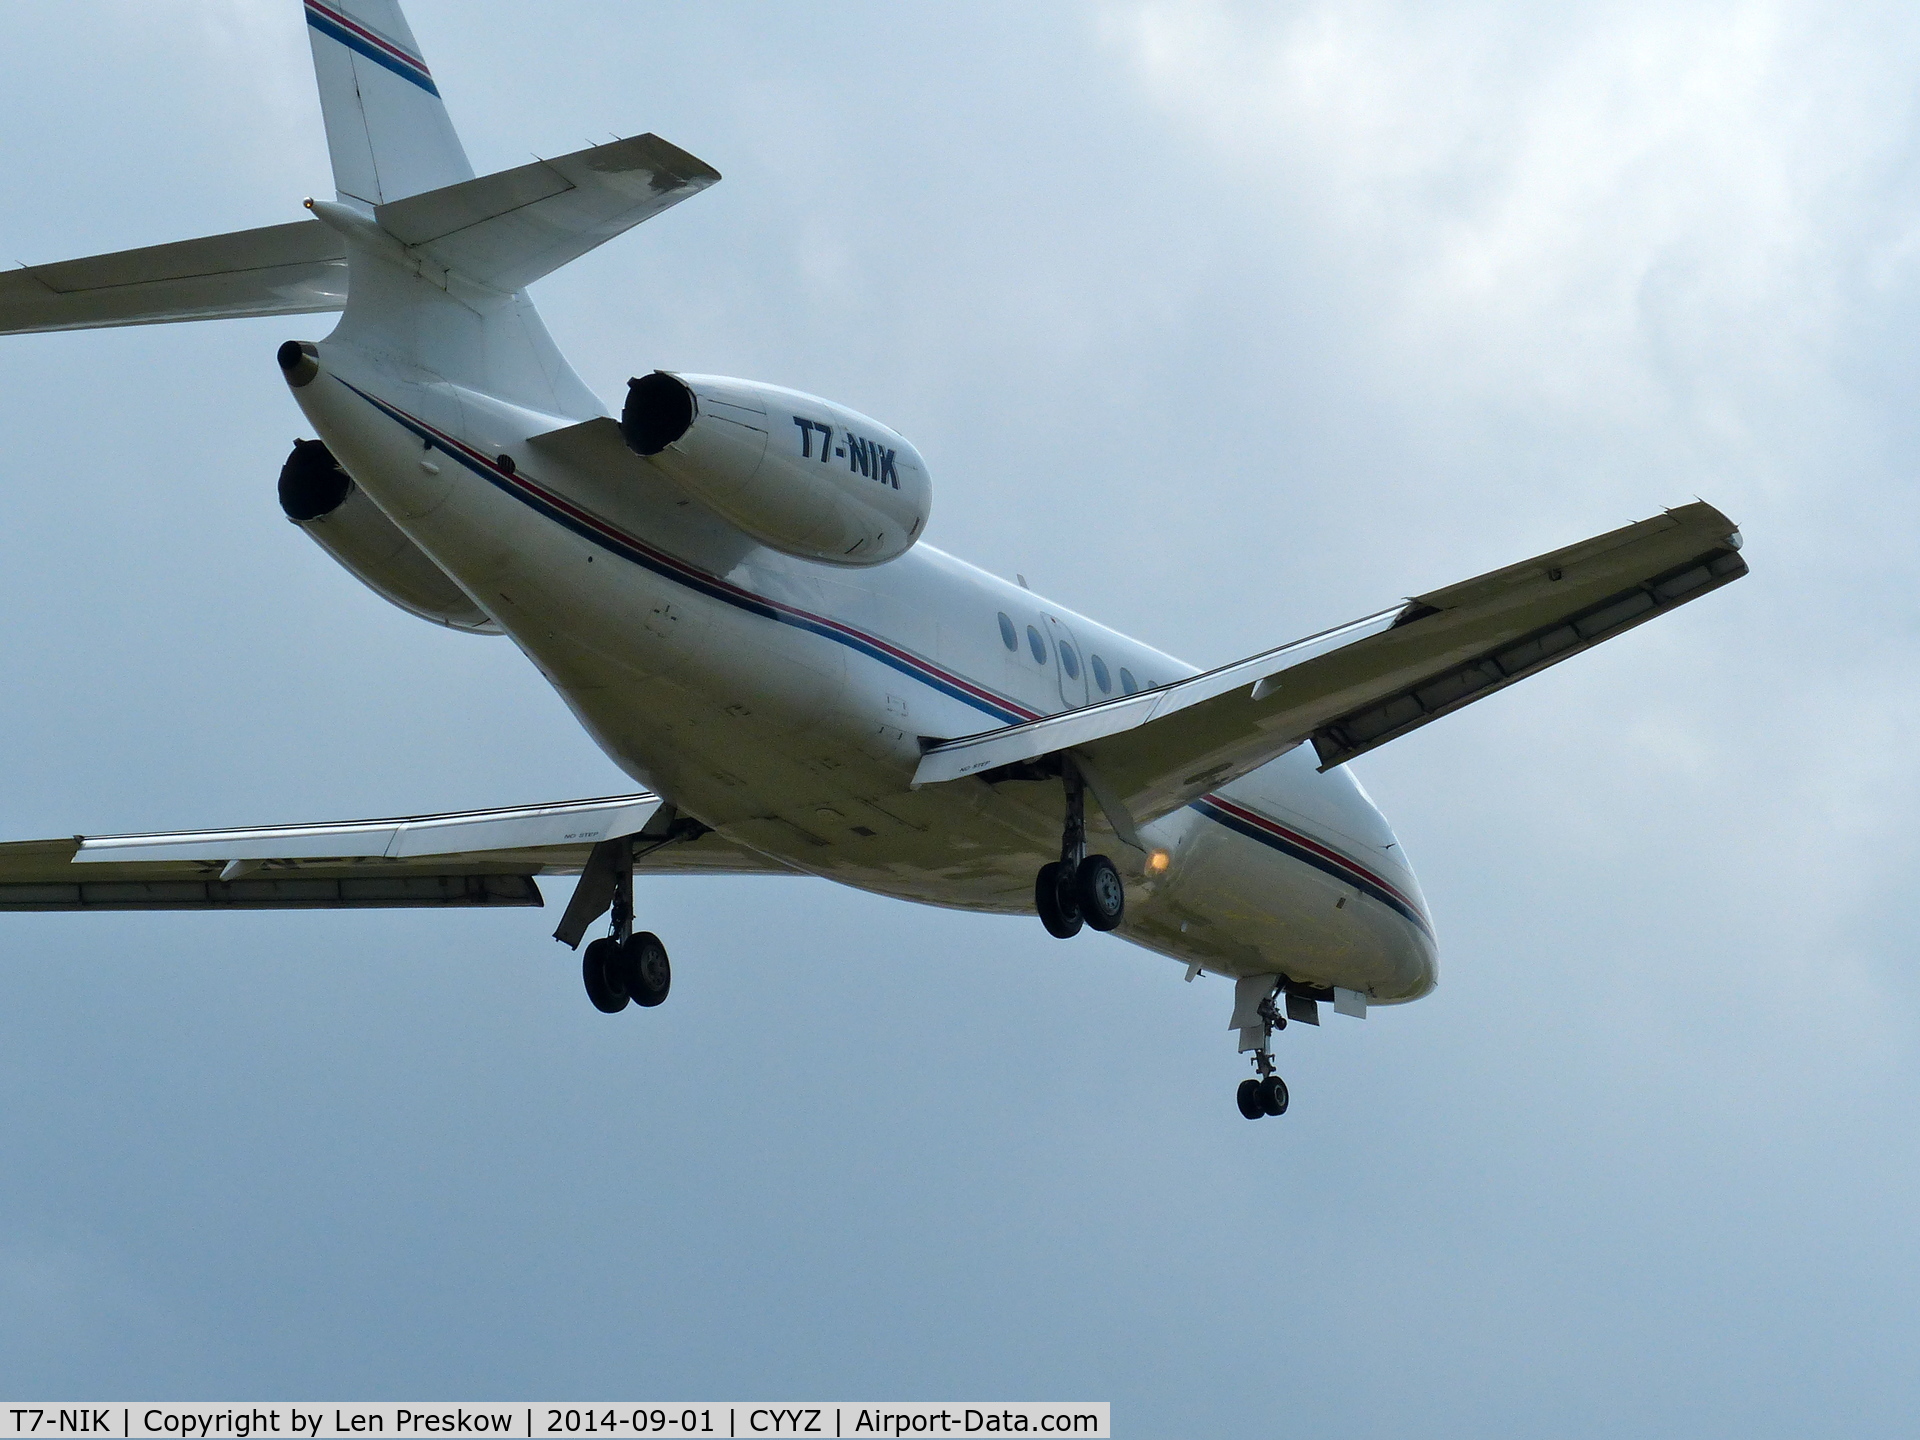 T7-NIK, 1996 Dassault Falcon 2000 C/N 025, Dassault Falcon 2000, T7-NIK, built n 1996 and registered to a private owner in San Marino. Short finals, runway 23, Lester B. Pearson International Airport, Toronto (YYZ).